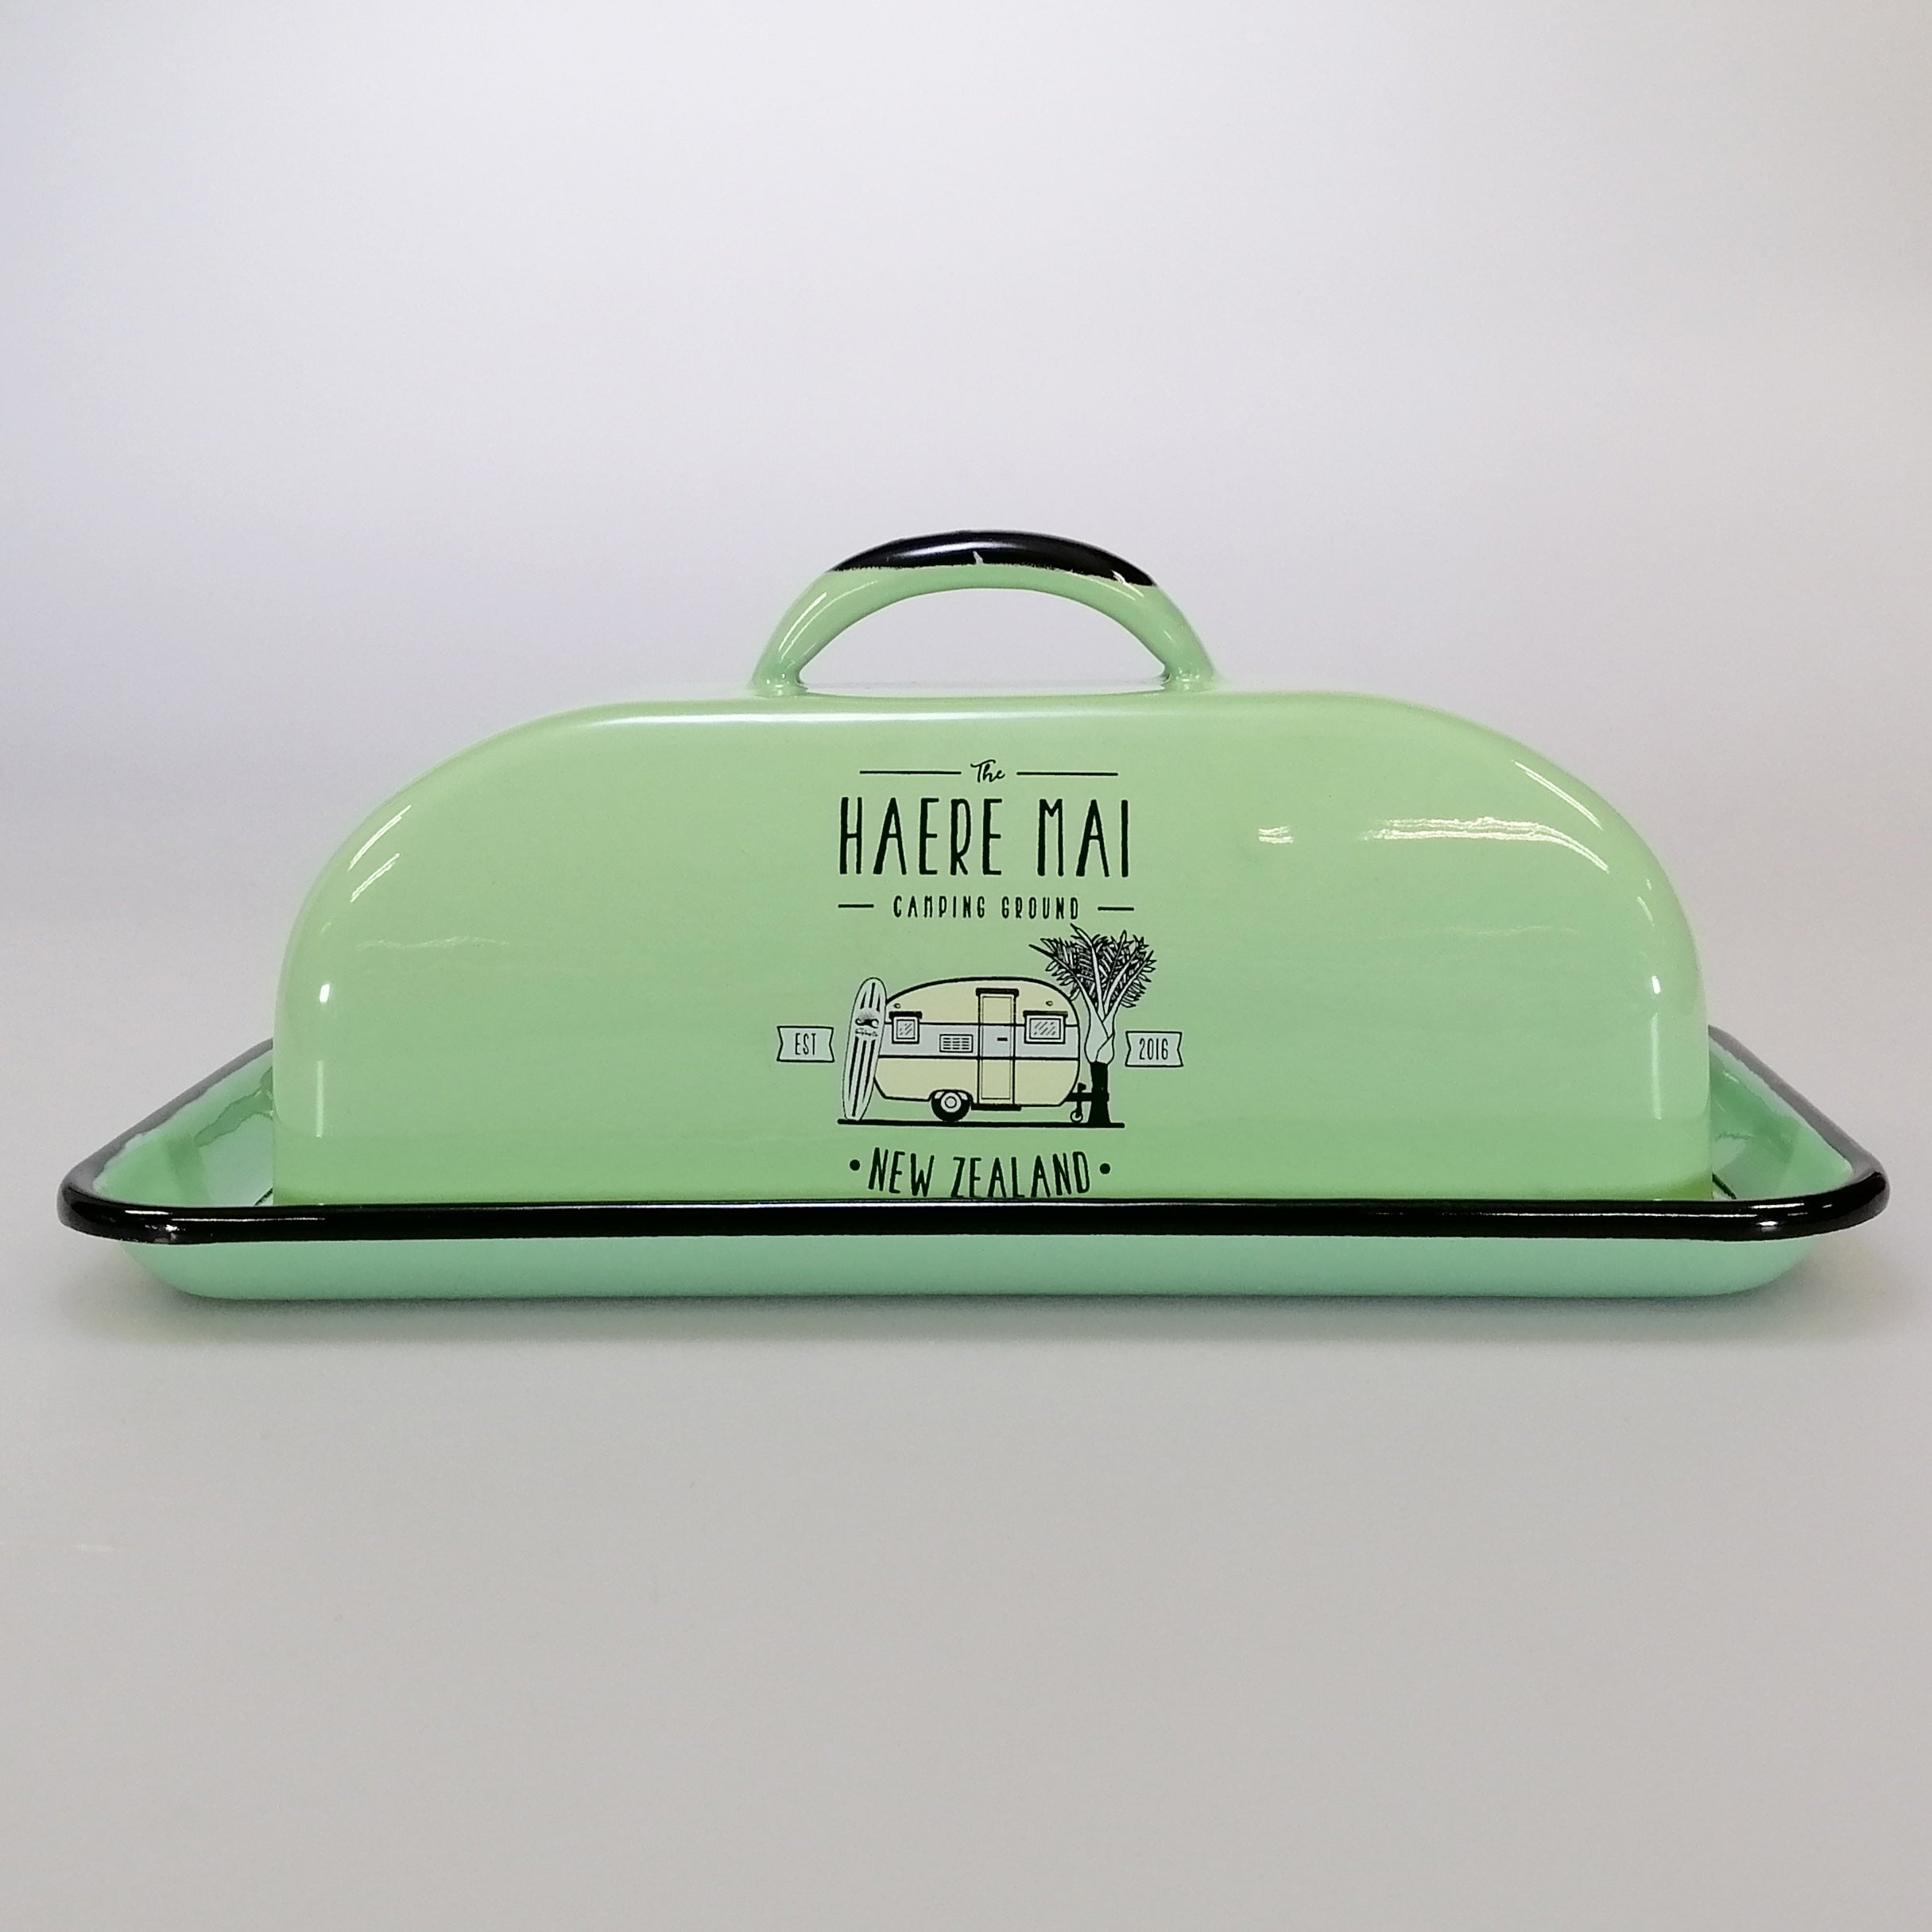 The Haere Mai Camping Ground - Green Butter Dish